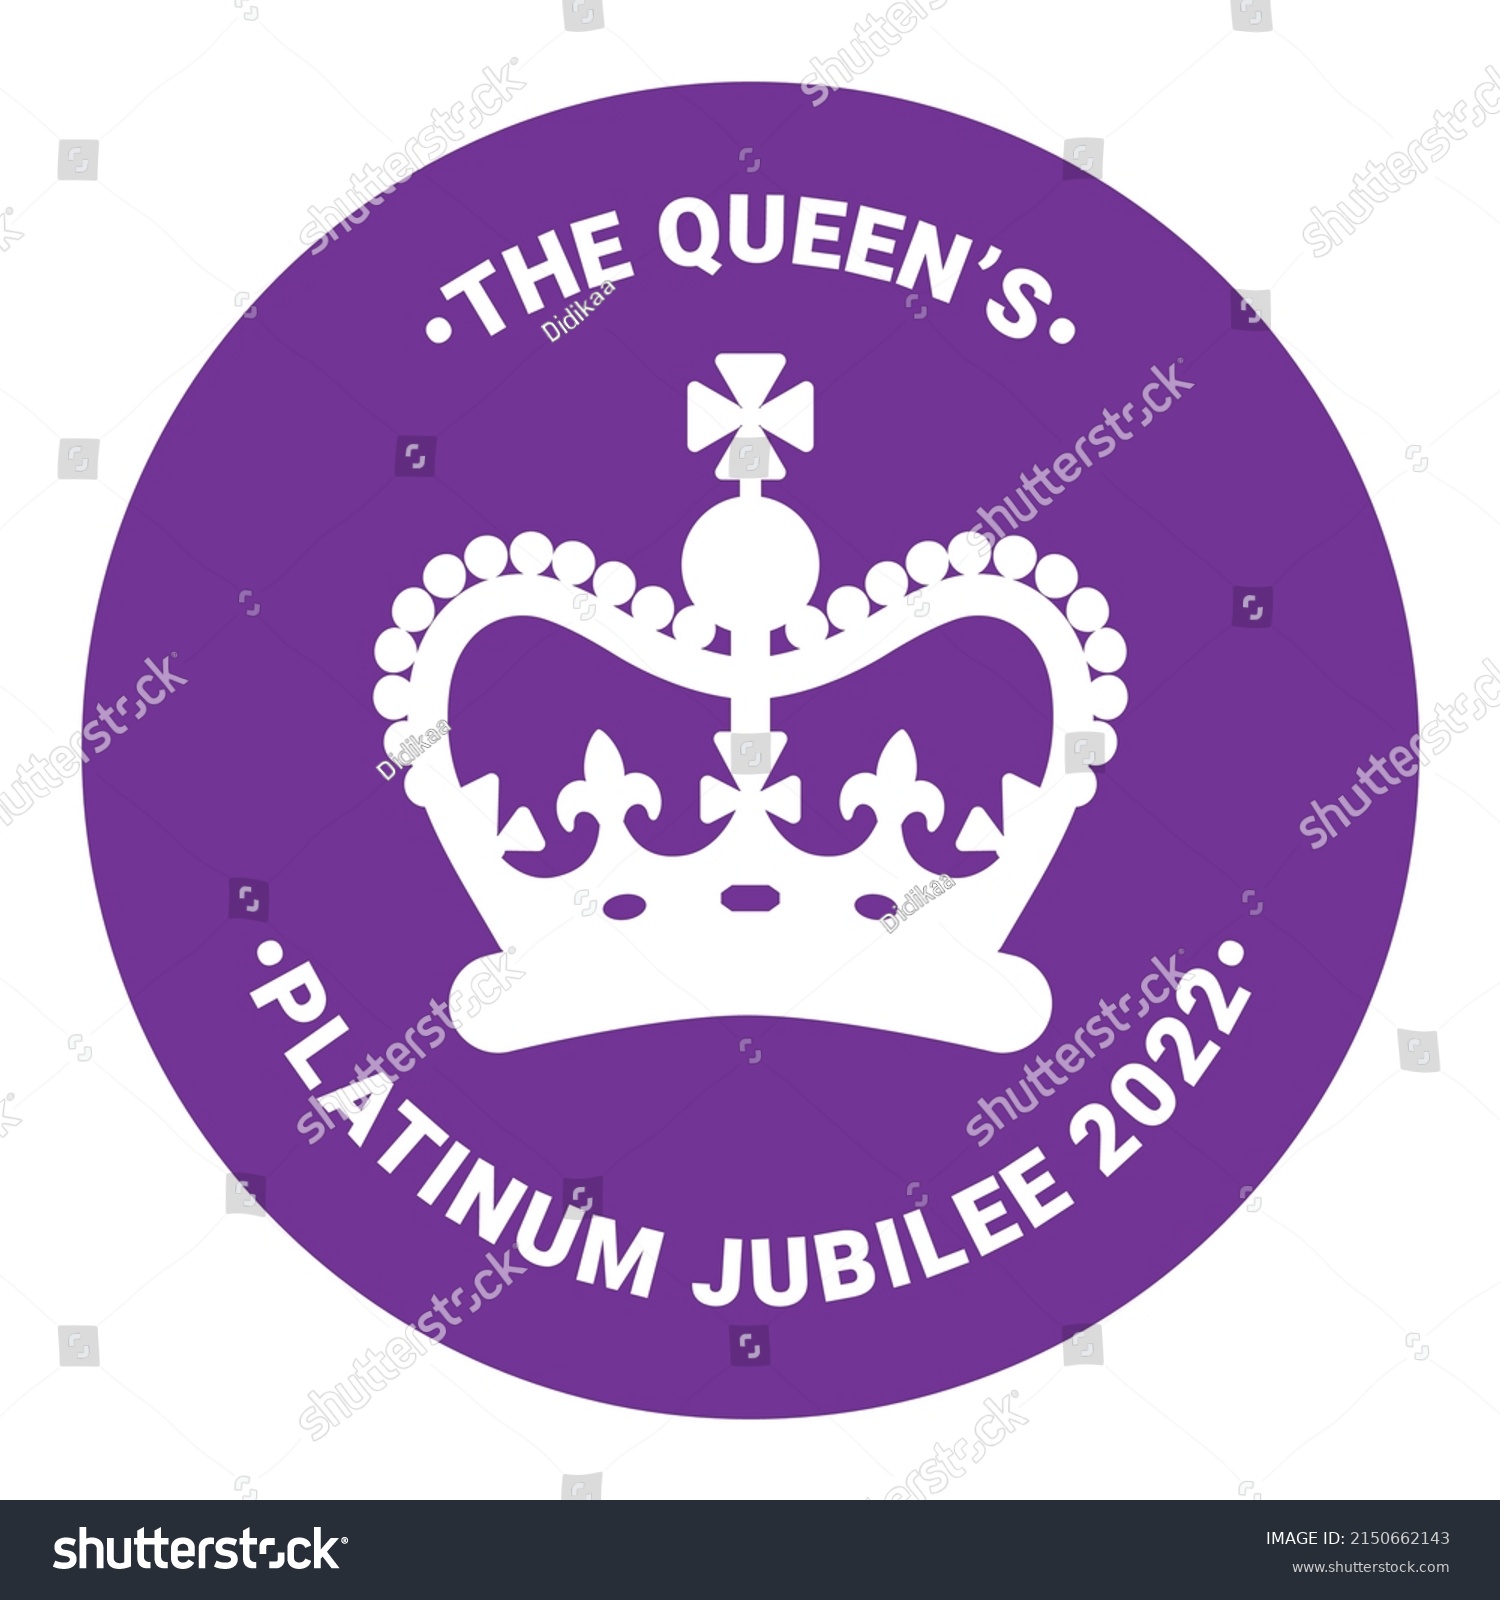 SVG of The Queen's Platinum Jubilee celebration. 2022. The Queen will become the first British Monarch to celebrate a Platinum Jubilee after 70 years of service.  svg